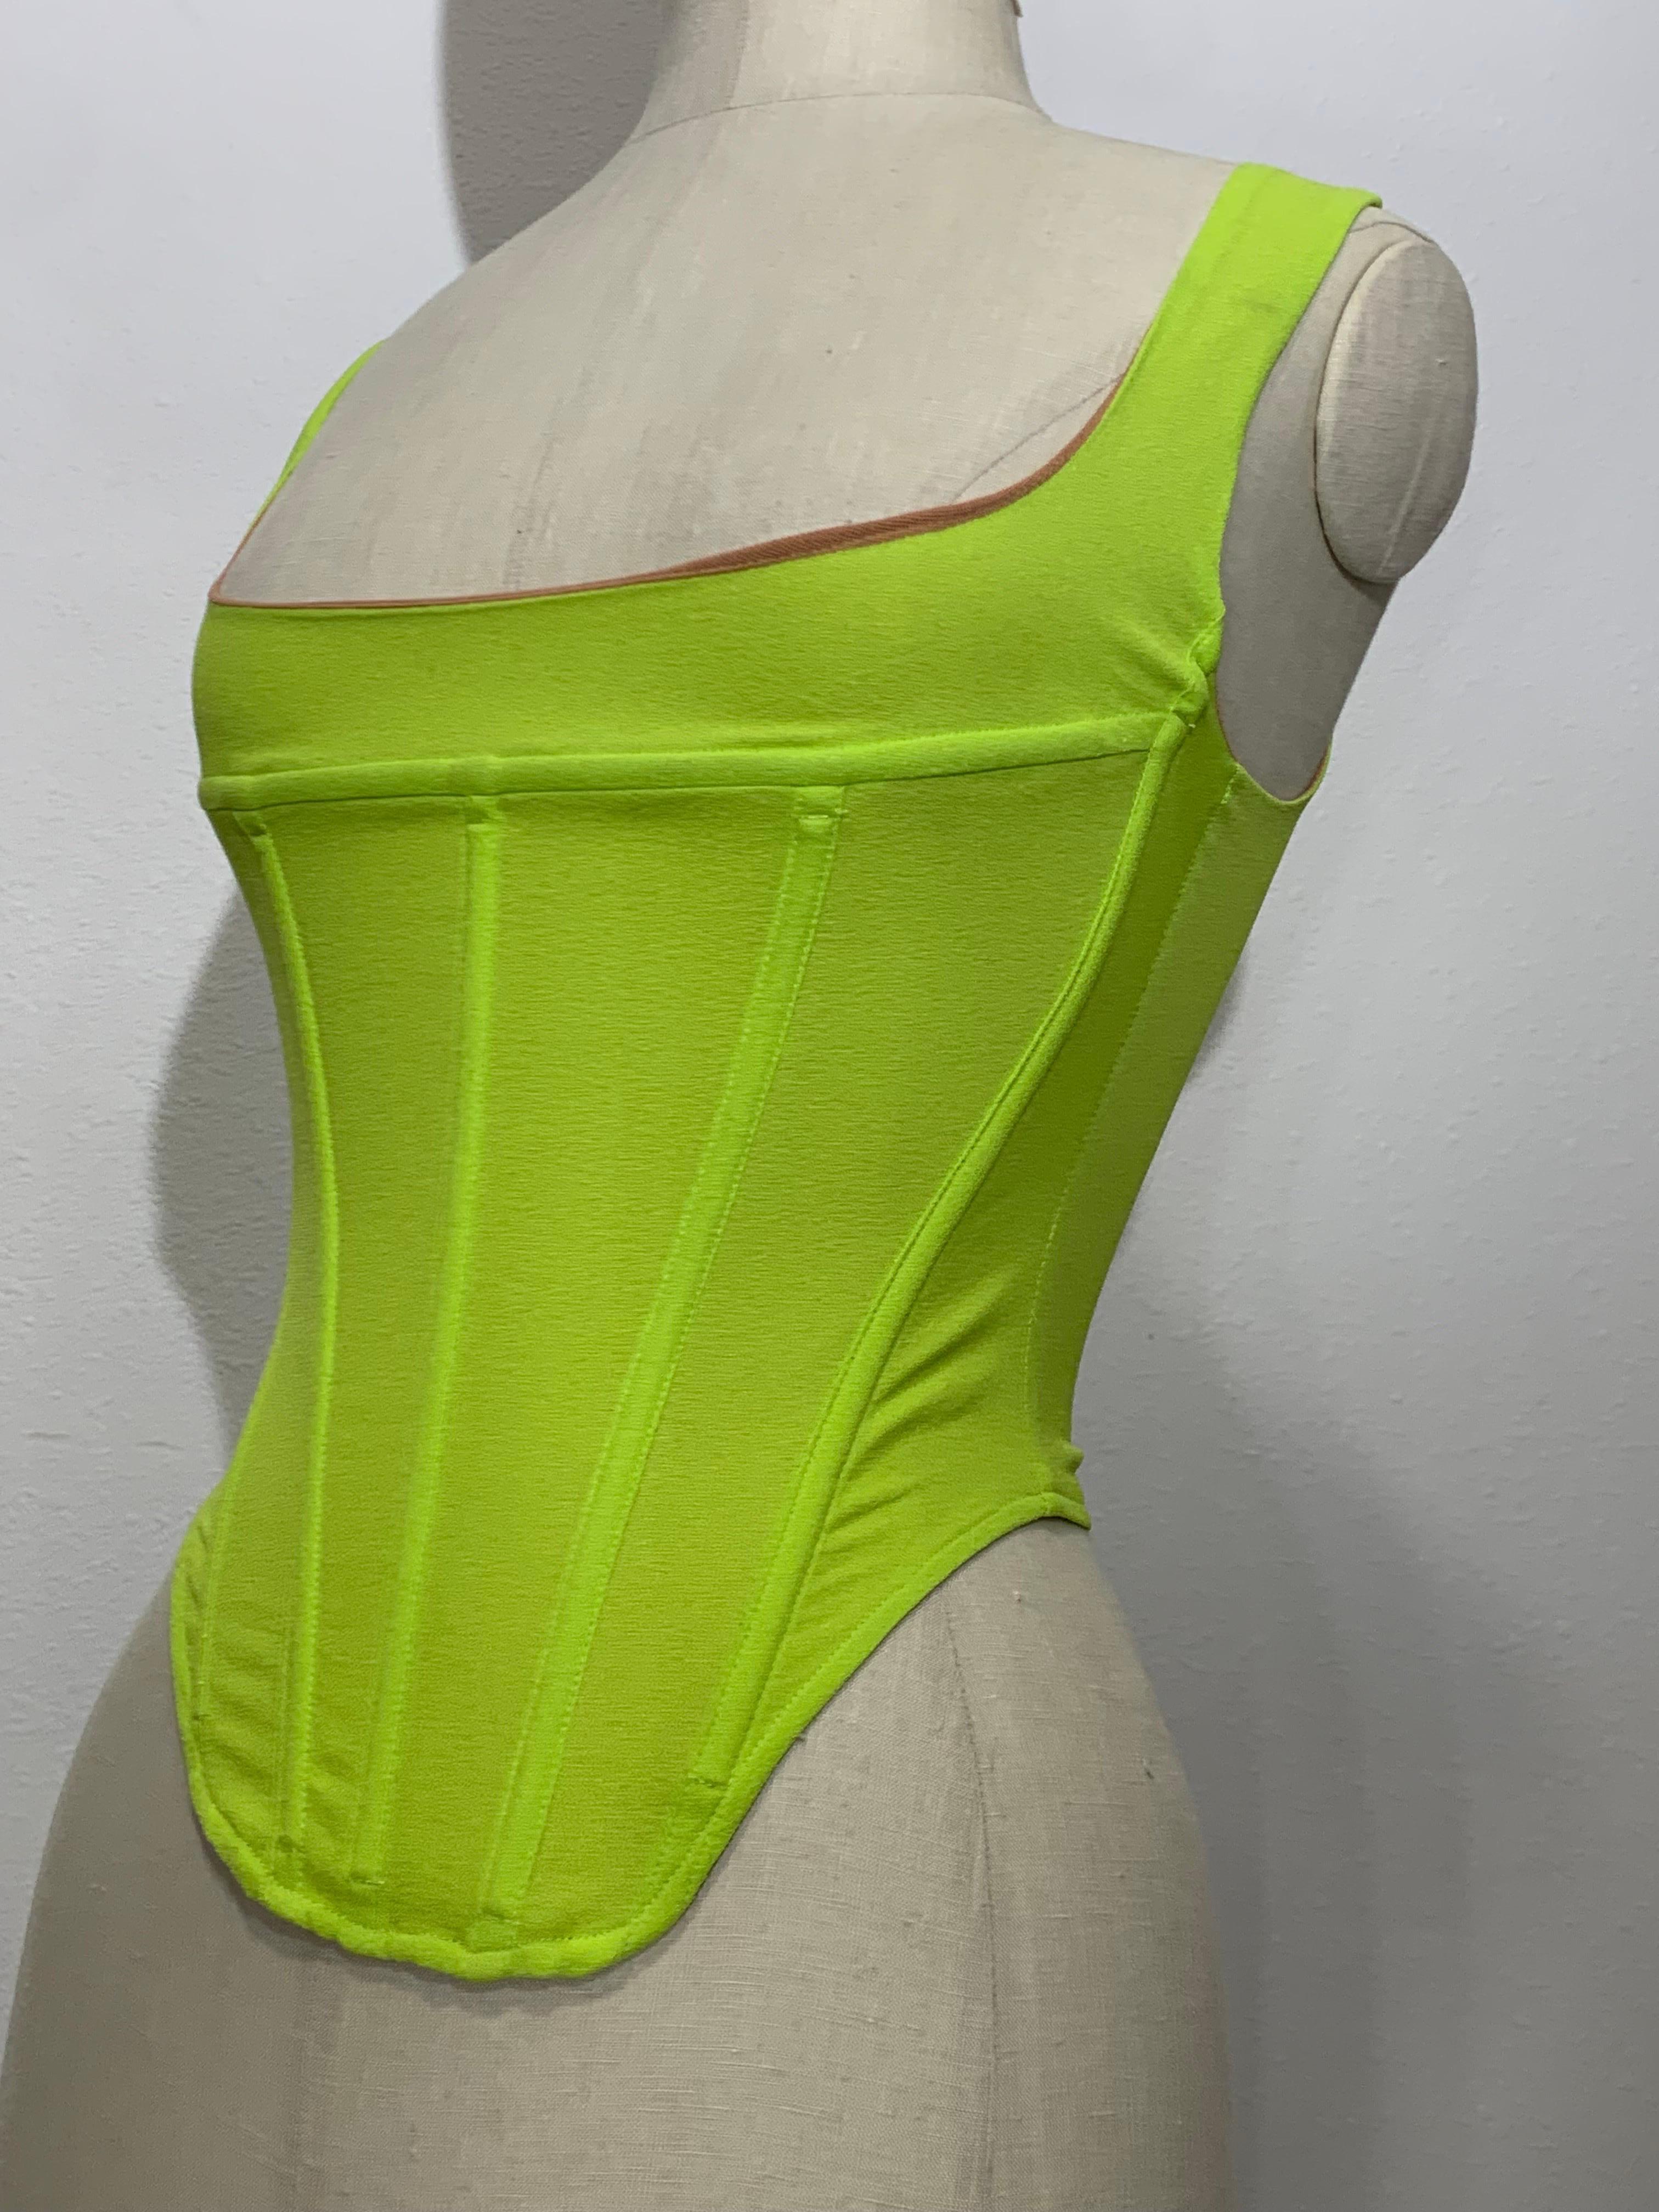 Neon Green Elasticized Mesh Corset w Boning and Full Back Zipper:  Low-cut squared décolletage. Stomacher front is boned with a round low front point. Nude mesh lining. Size Extra Small. 